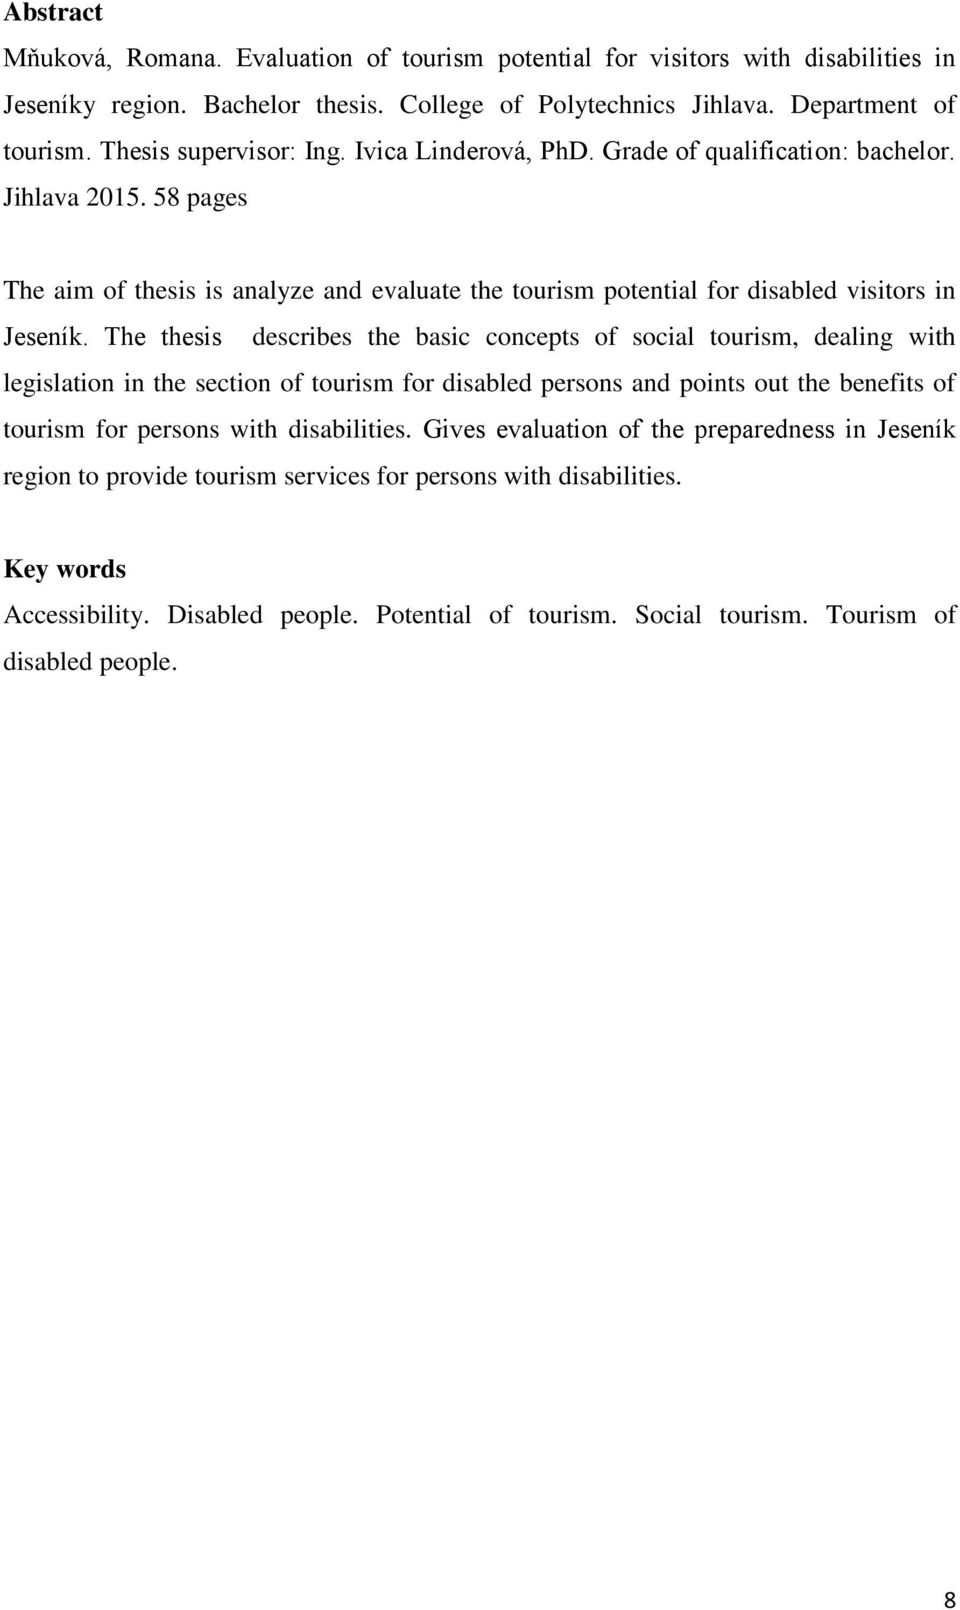 The thesis describes the basic concepts of social tourism, dealing with legislation in the section of tourism for disabled persons and points out the benefits of tourism for persons with disabilities.